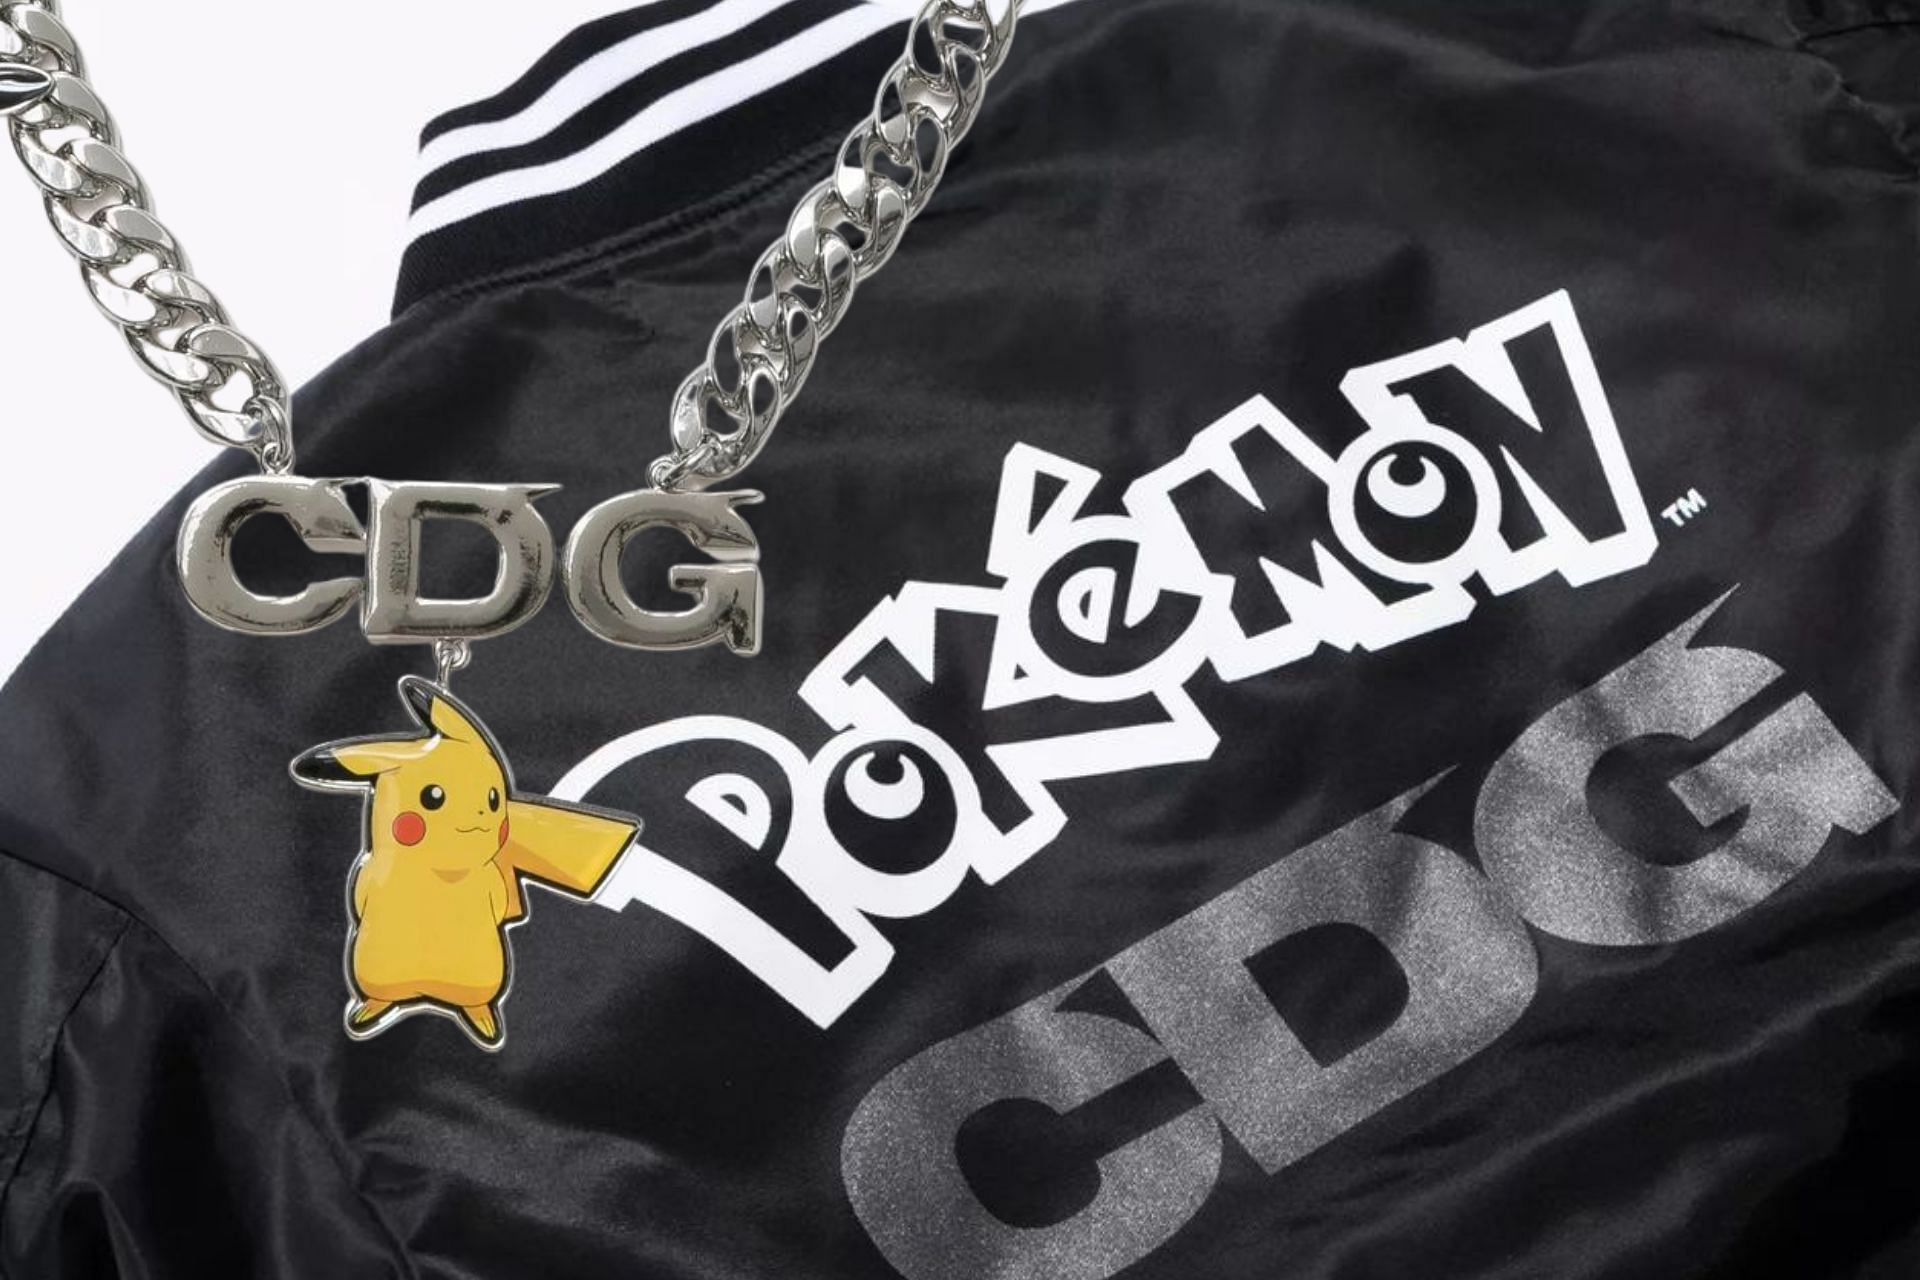 Upcoming 30-piece Comme des Garcons x Pokemon CDG apparel, accessories, and footwear collection (Image via @cdgcdgcdg / Instagram)